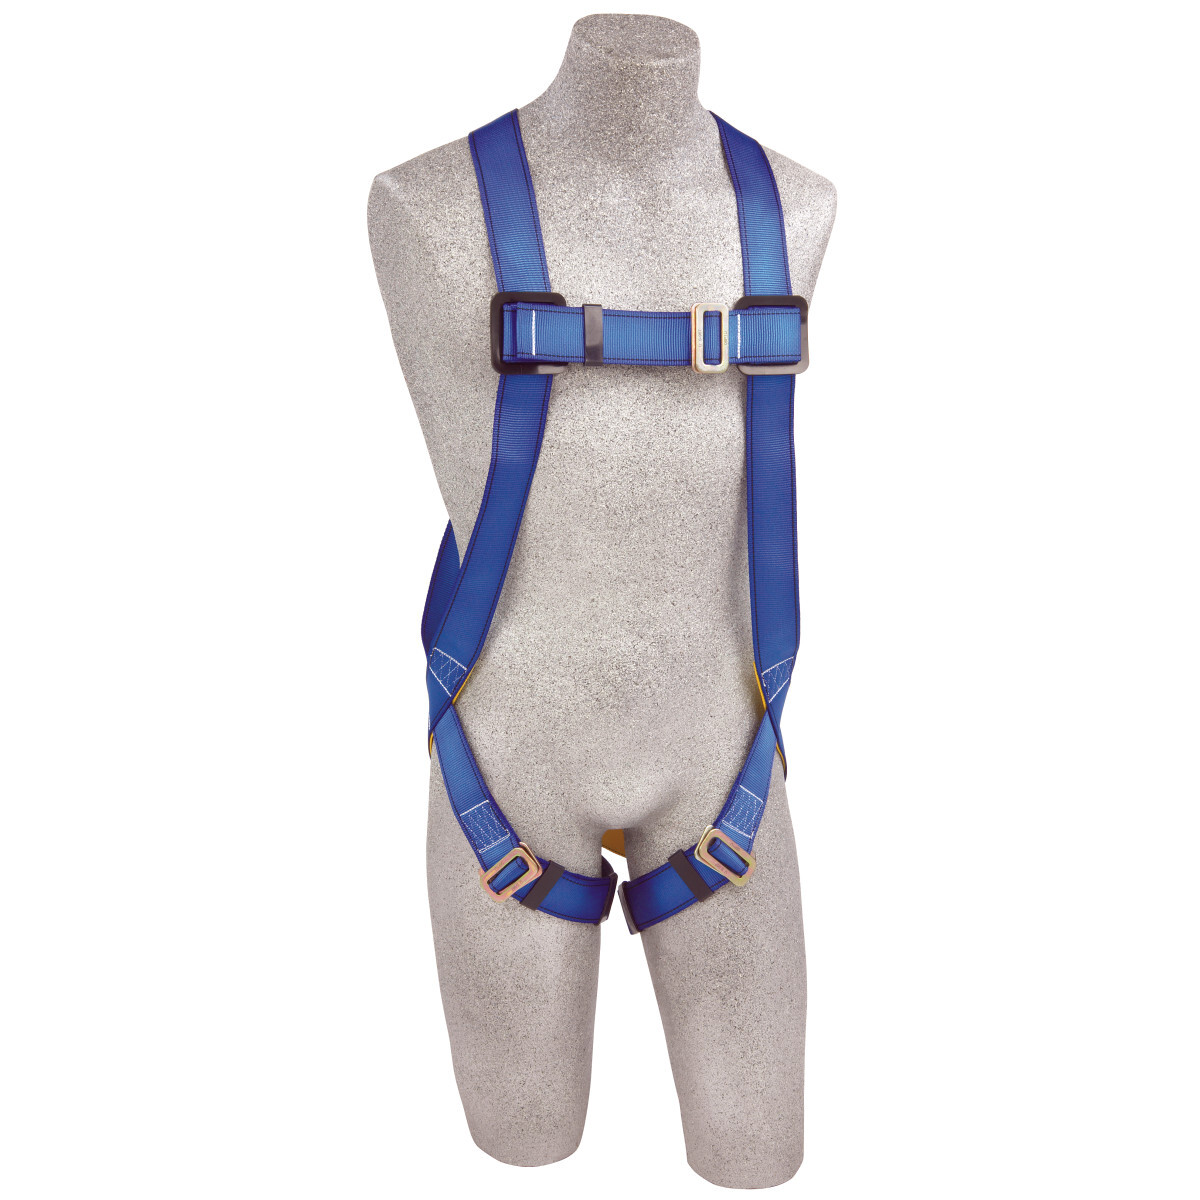 3M™ DBI-SALA® Universal PROTECTA® FIRST™ Full Body Style 3-Point Harness With Back D-Ring And Pass-Thru Leg Strap Buckle